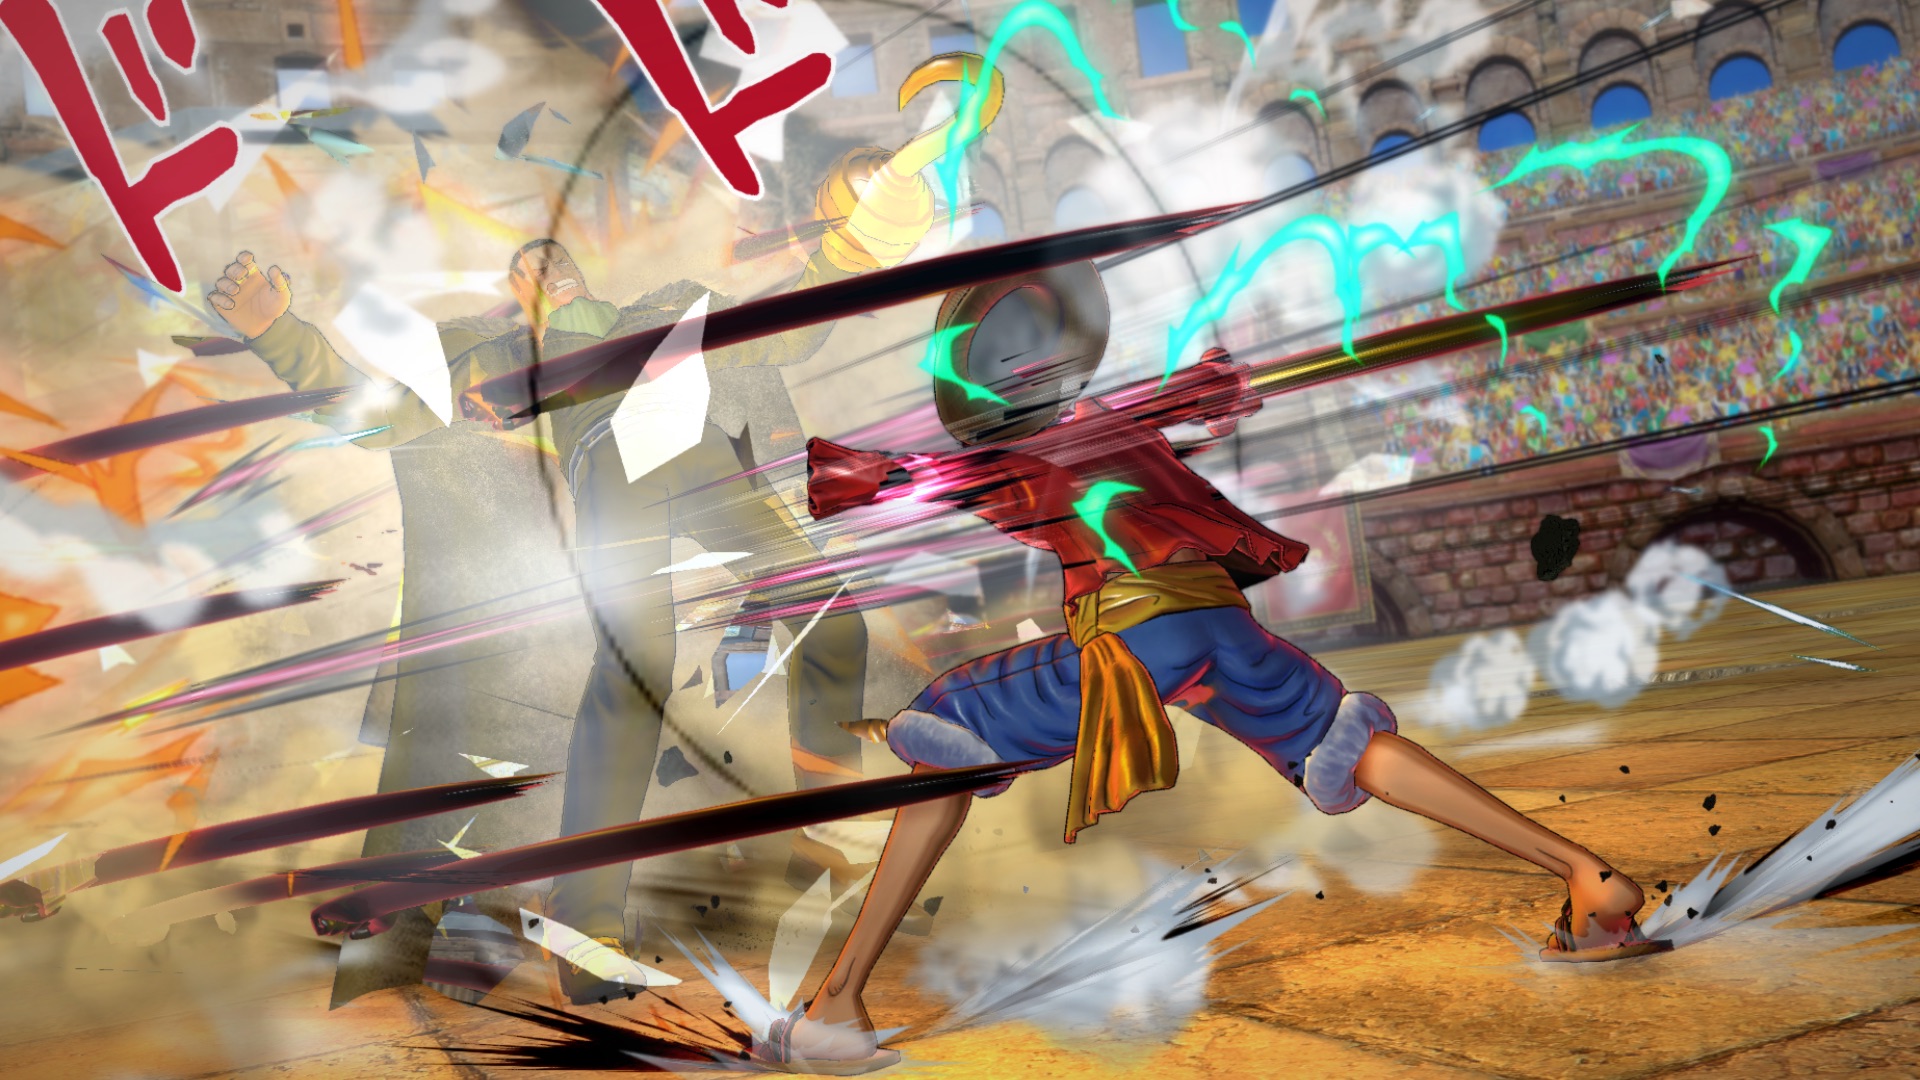 One Piece Burning Blood screens #4